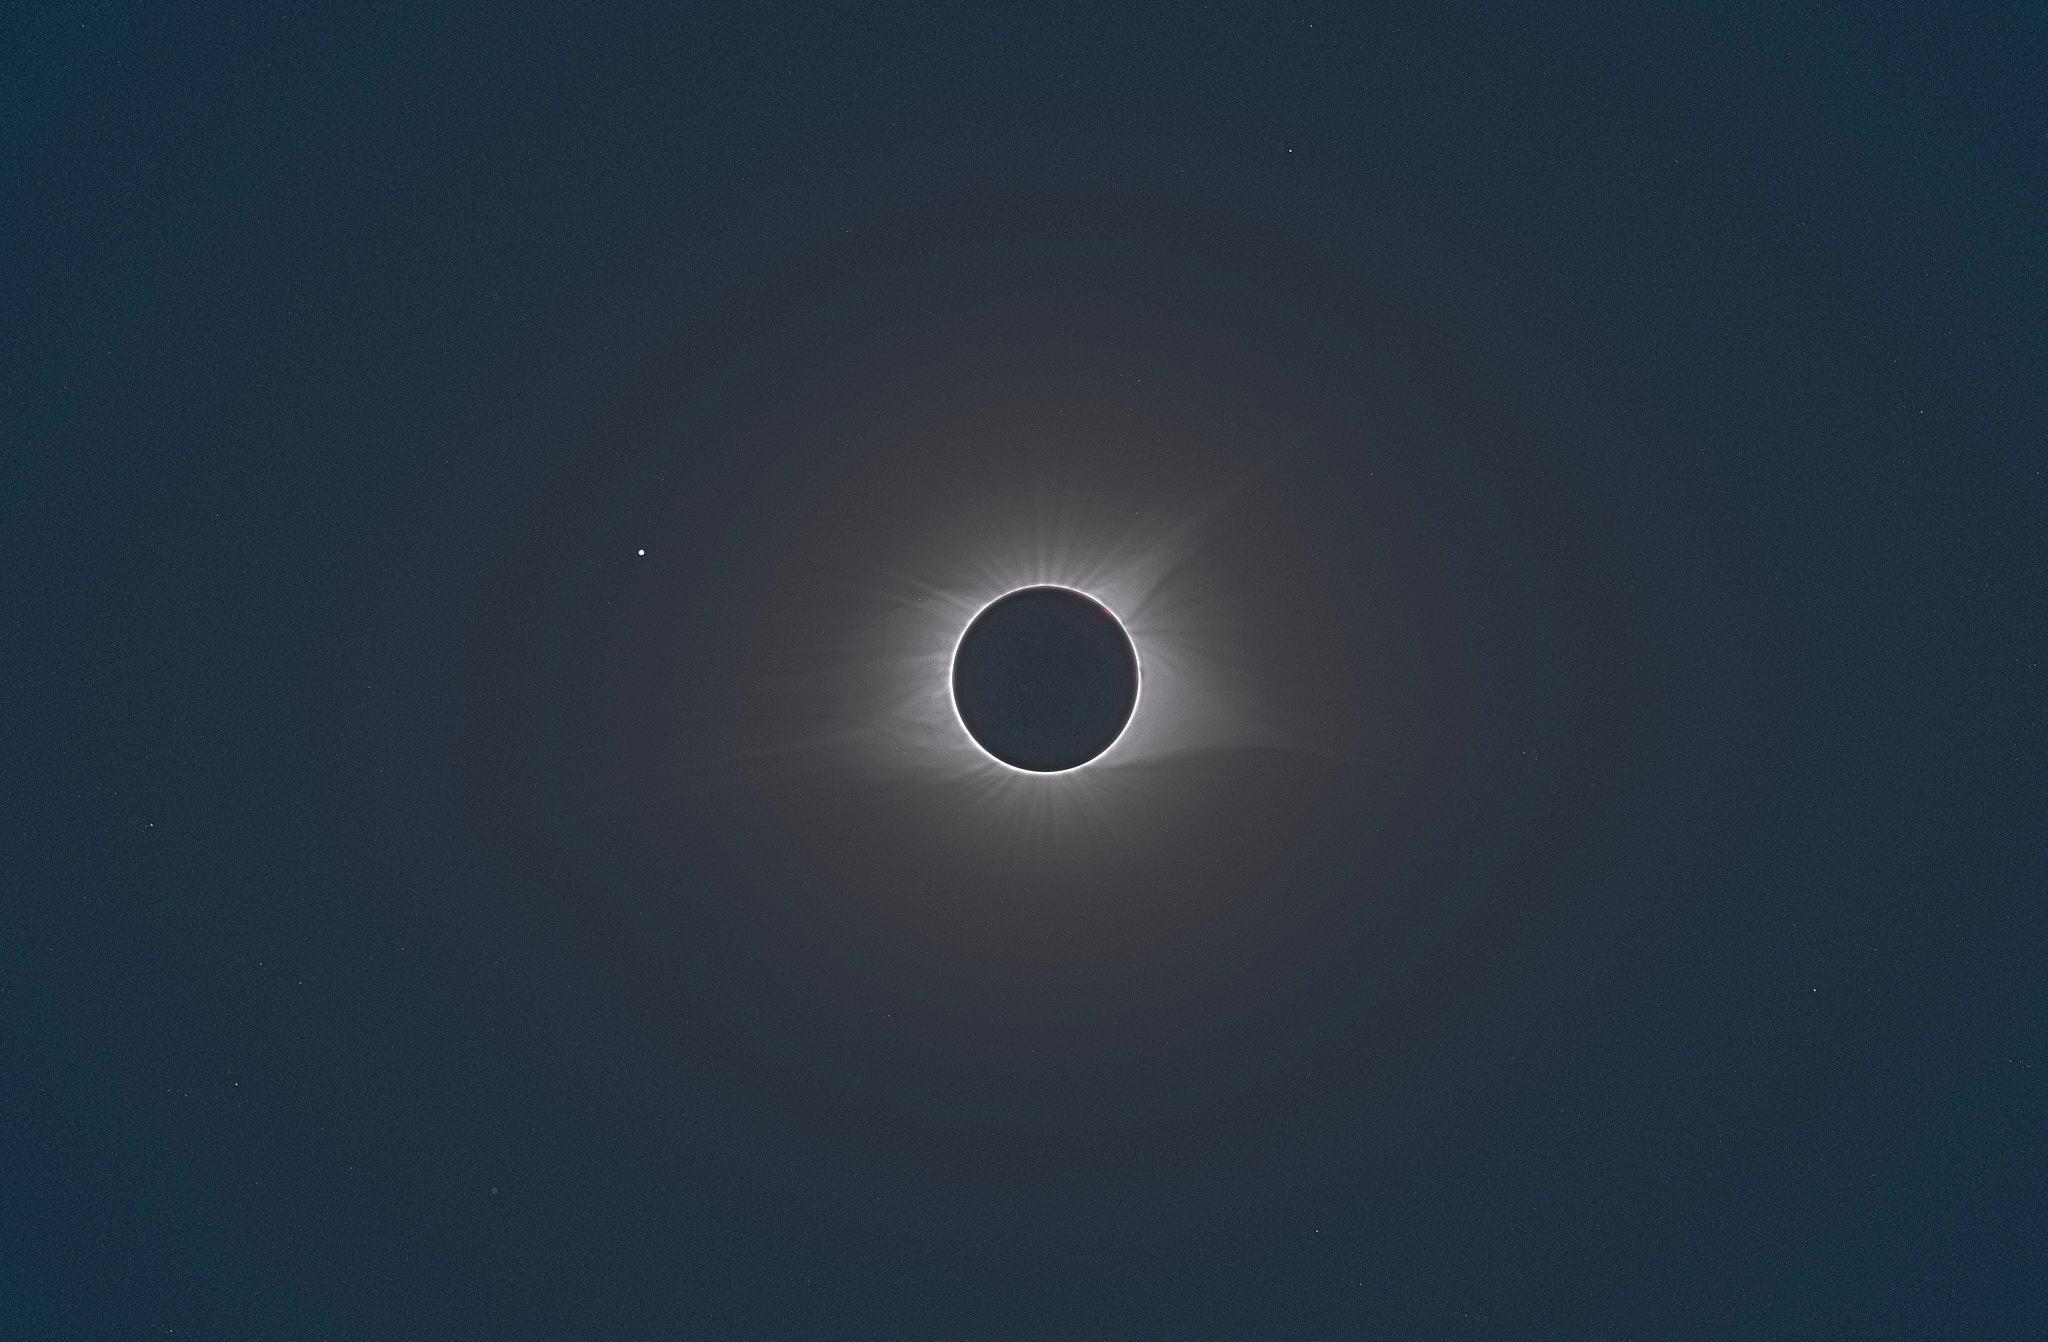 The sun obscured by the moon but for a tiny outline around it, with broad patterns in the corona visible. The star Regulus is seen to the lower left of the sun.